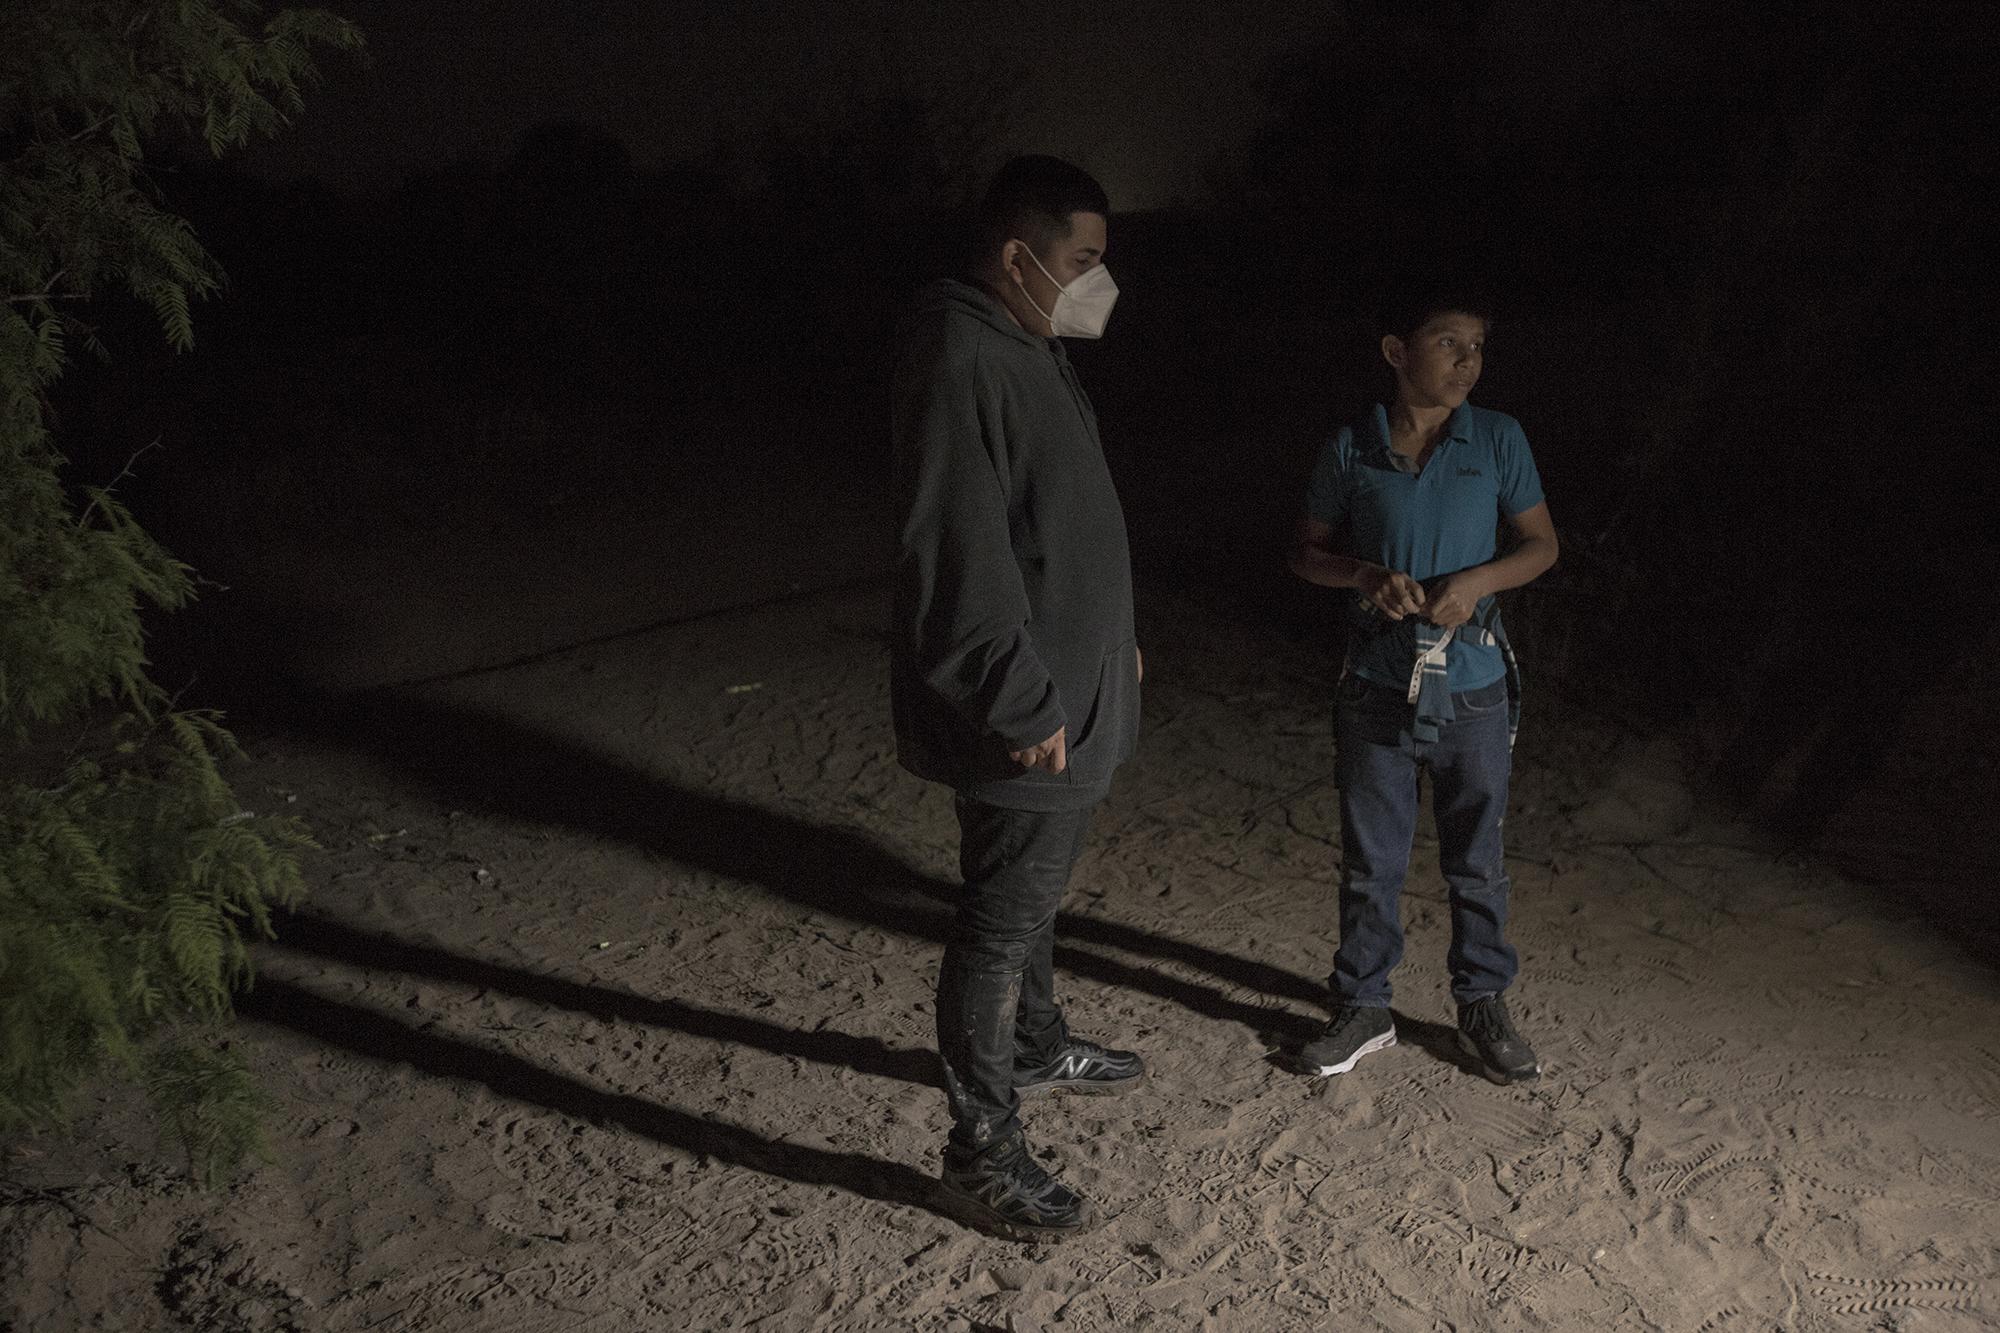 Joan José Diego (left), 17, spent 12 days traveling from Zacapa, Guatemala to the U.S. border. He crossed the river alone, hoping to rejoin his mother in Miami. Standing next to him is Óscar Riquelme Hurtado, 12, who had been travelling alone since February 26. Óscar left his home in Nuevo Progreso, a municipality in San Marcos, Guatemala, and traveled to the border with the help of a coyote hired by his uncle in Los Angeles. His uncle had hired the smuggler to bring Óscar’s mother across, but she decided to send the boy alone.